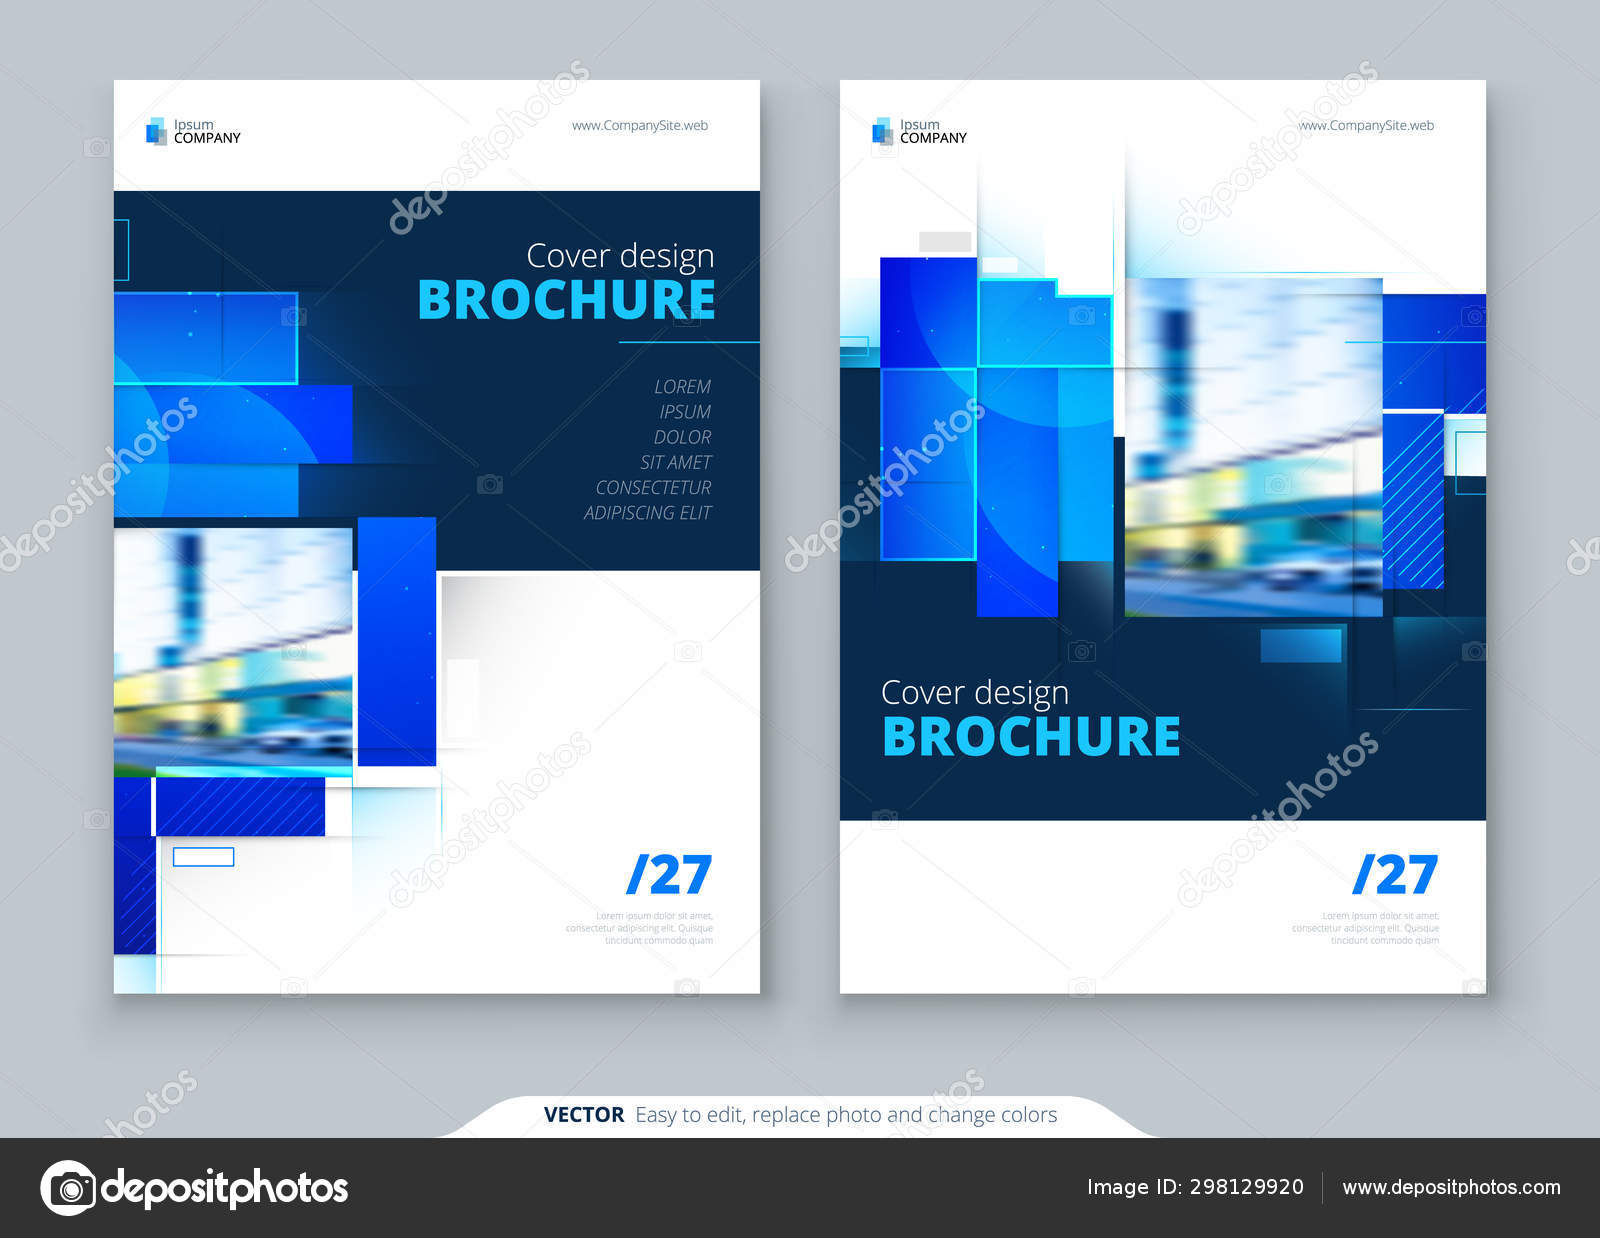 Download Blue Brochure Cover Template Layout Design Corporate Business Annual Report Catalog Magazine Flyer Mockup Creative Modern Bright Concept With Square Shapes Stock Vector Royalty Free Vector Image By C Greatbergens 298129920